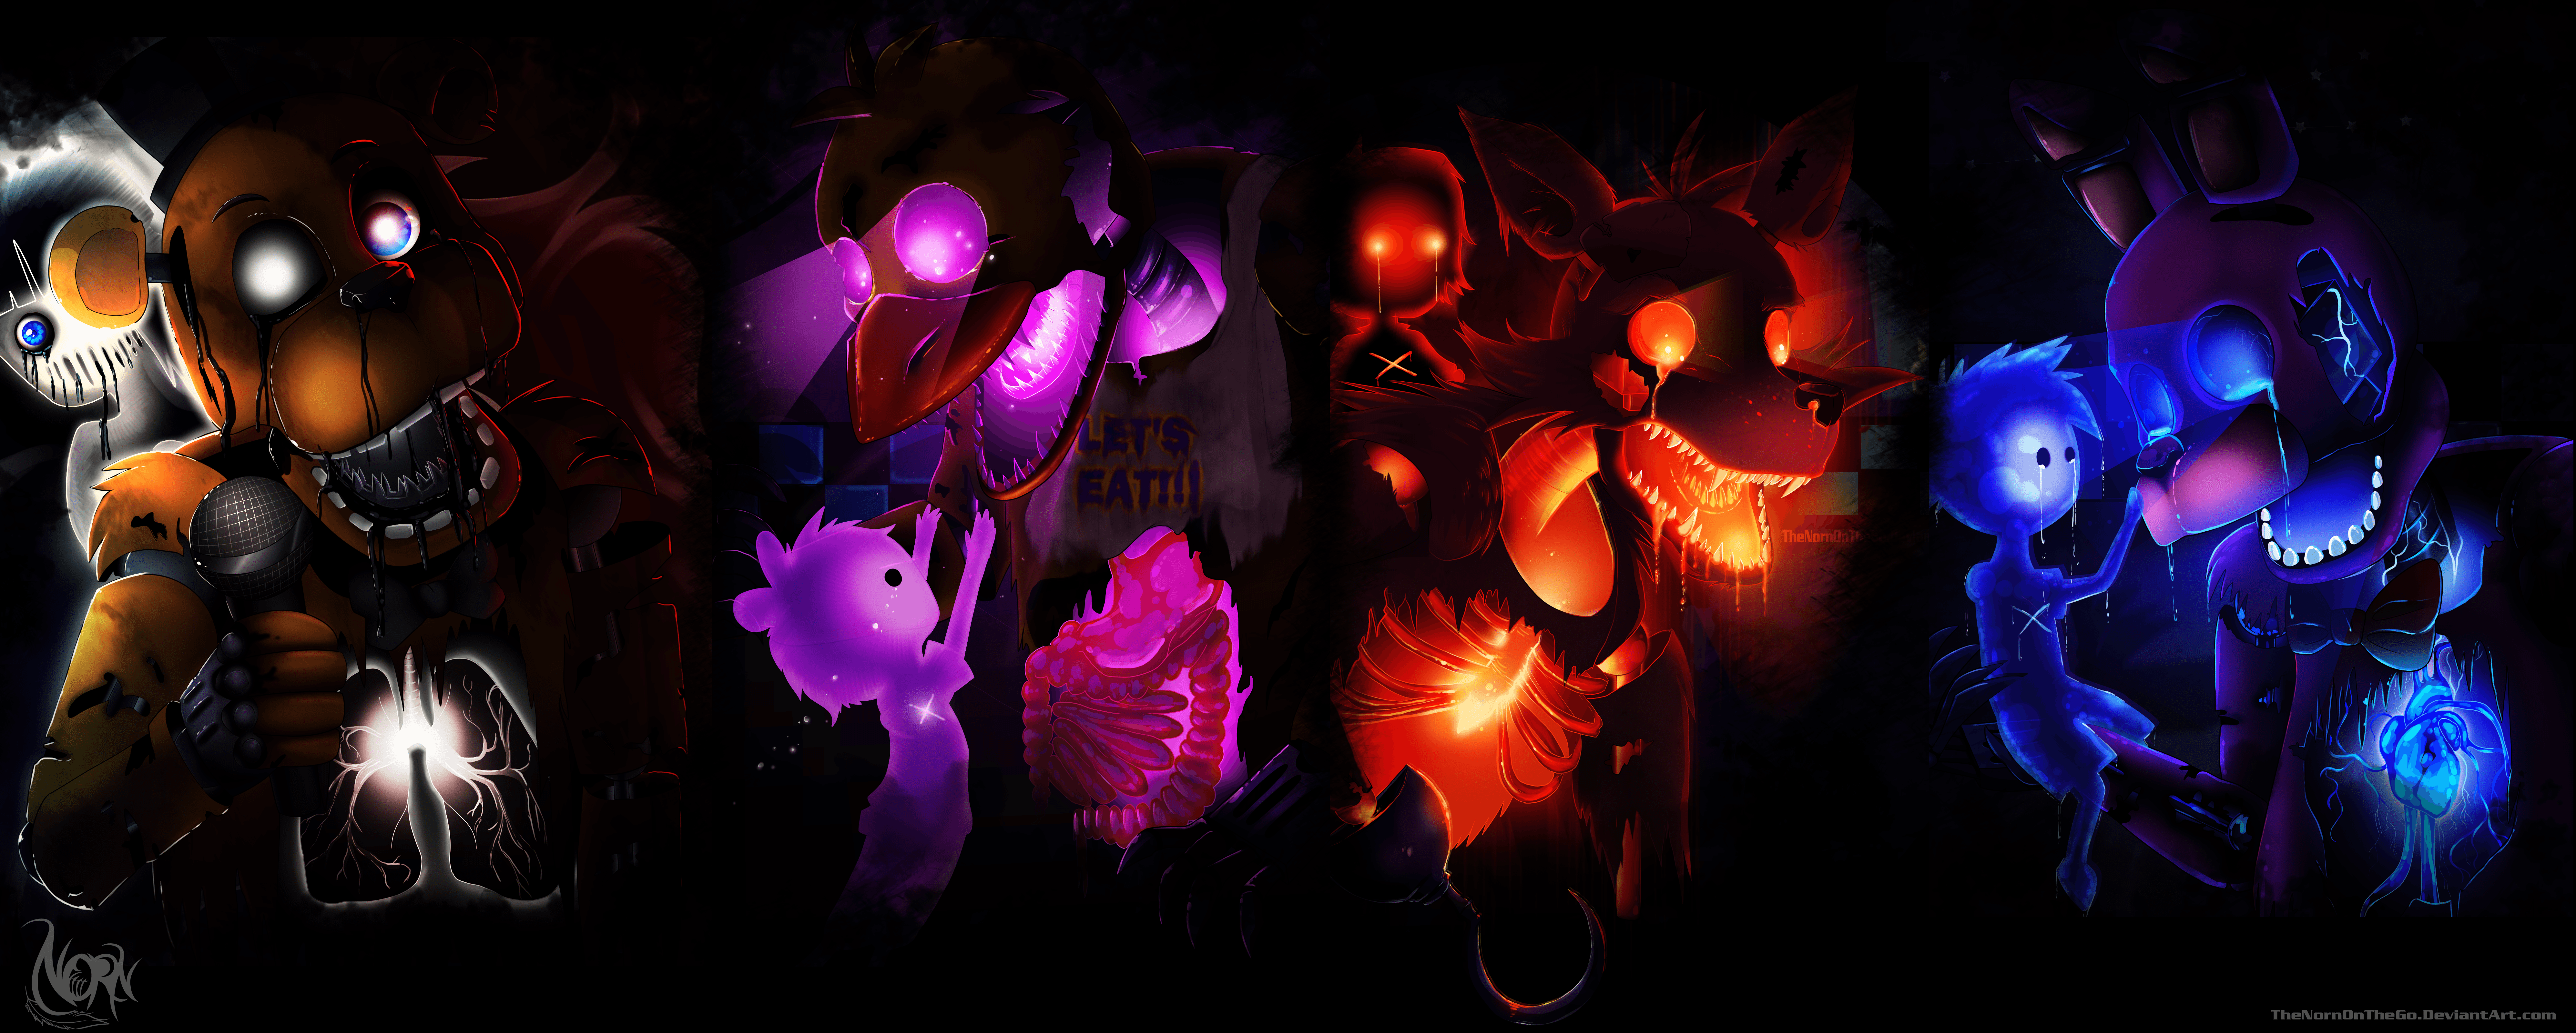 Purple Guy Fnaf Wallpapers William Afton Purple Guy The Man Behind The Slaughter Janel Star